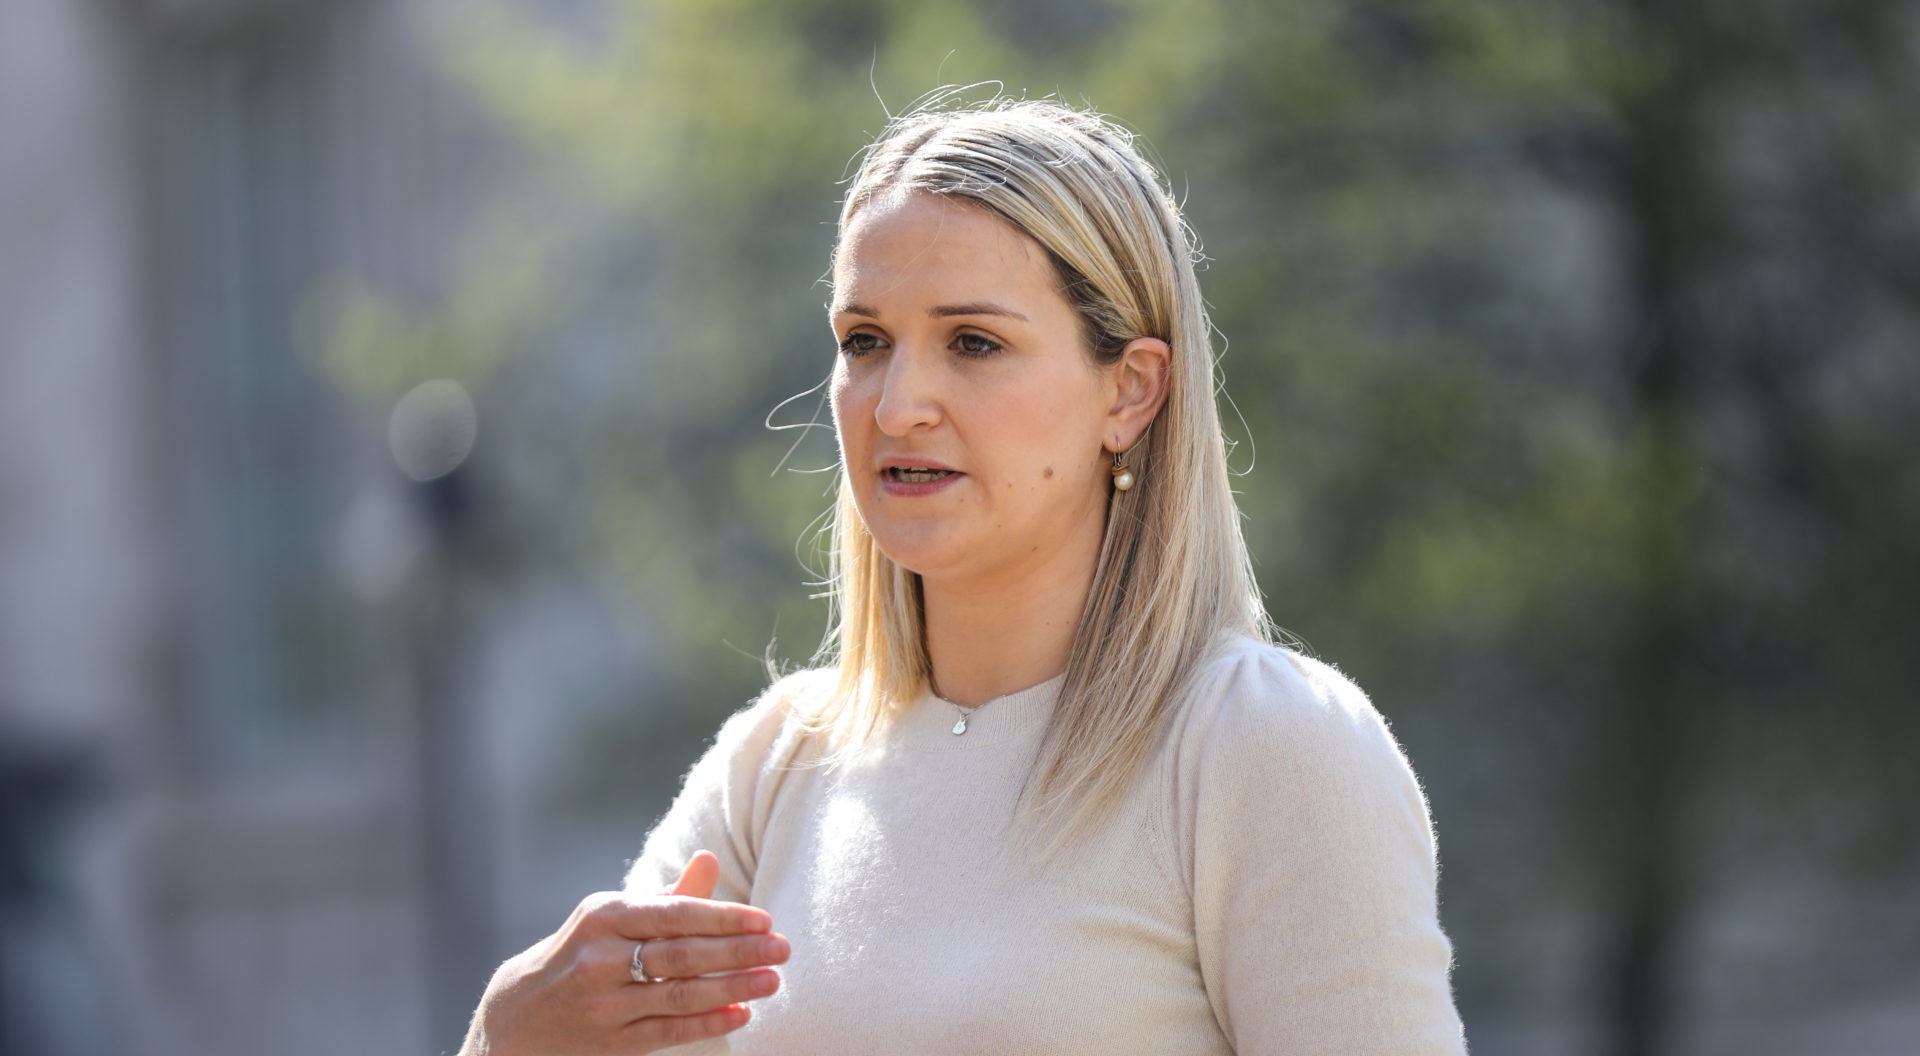 Minister for Justice Helen McEntee is seen at a media doorstep in April 2022.